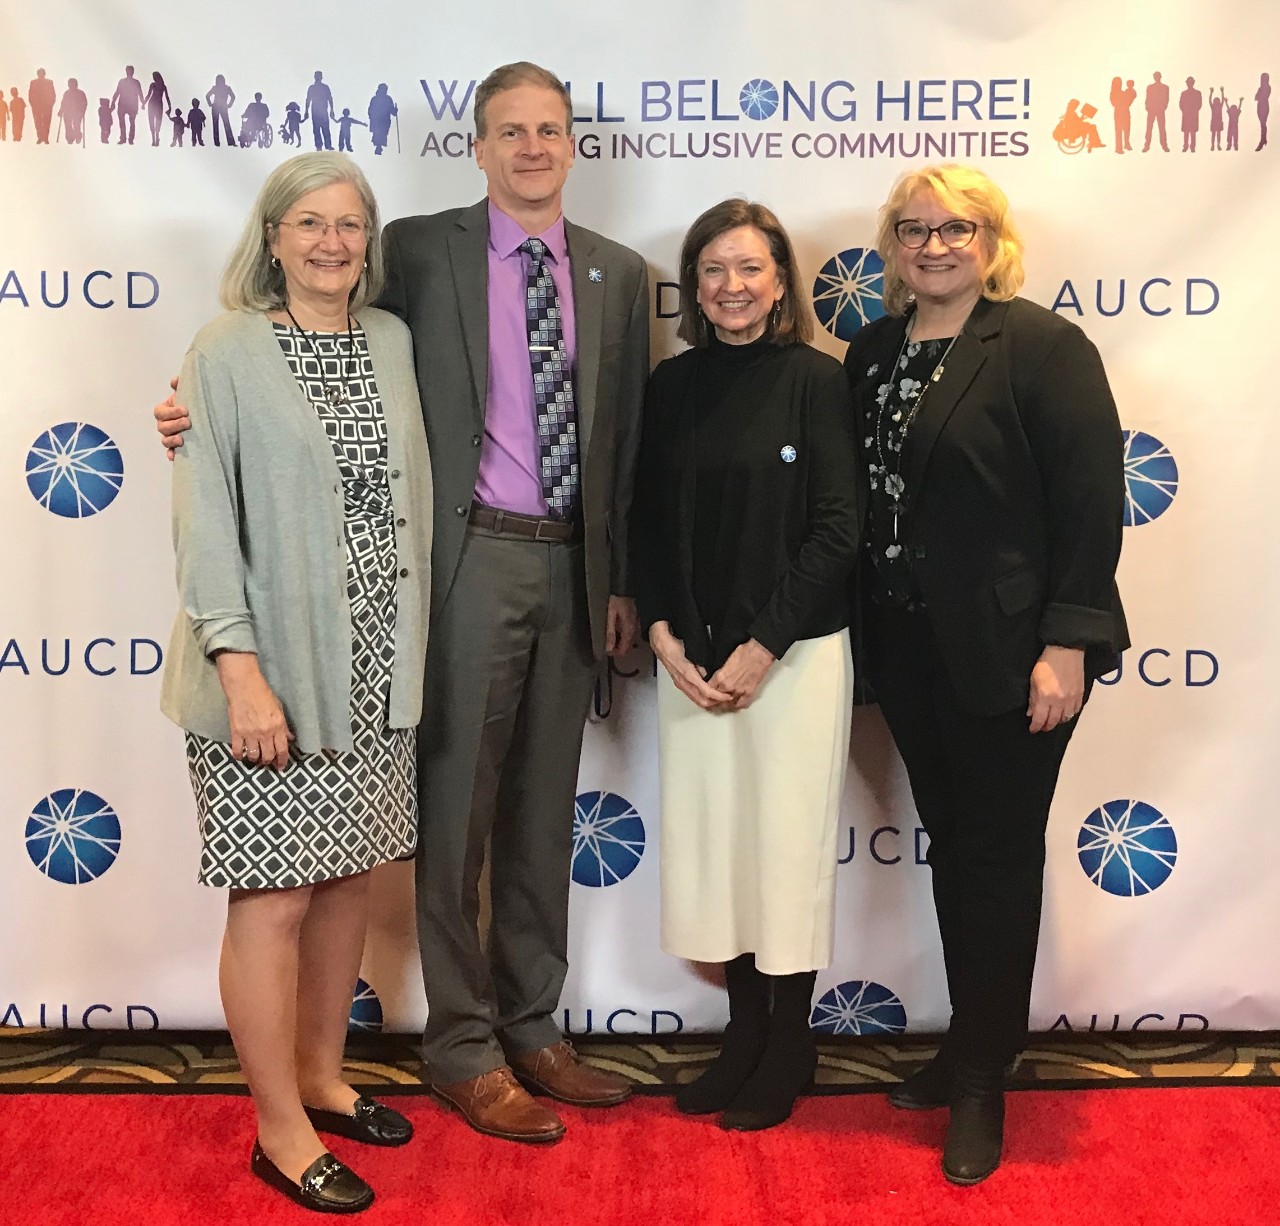 The photo shows three women and one man, all professionally dressed, posing at the Association of University Centers on Excellence in Disabilities Conference. 